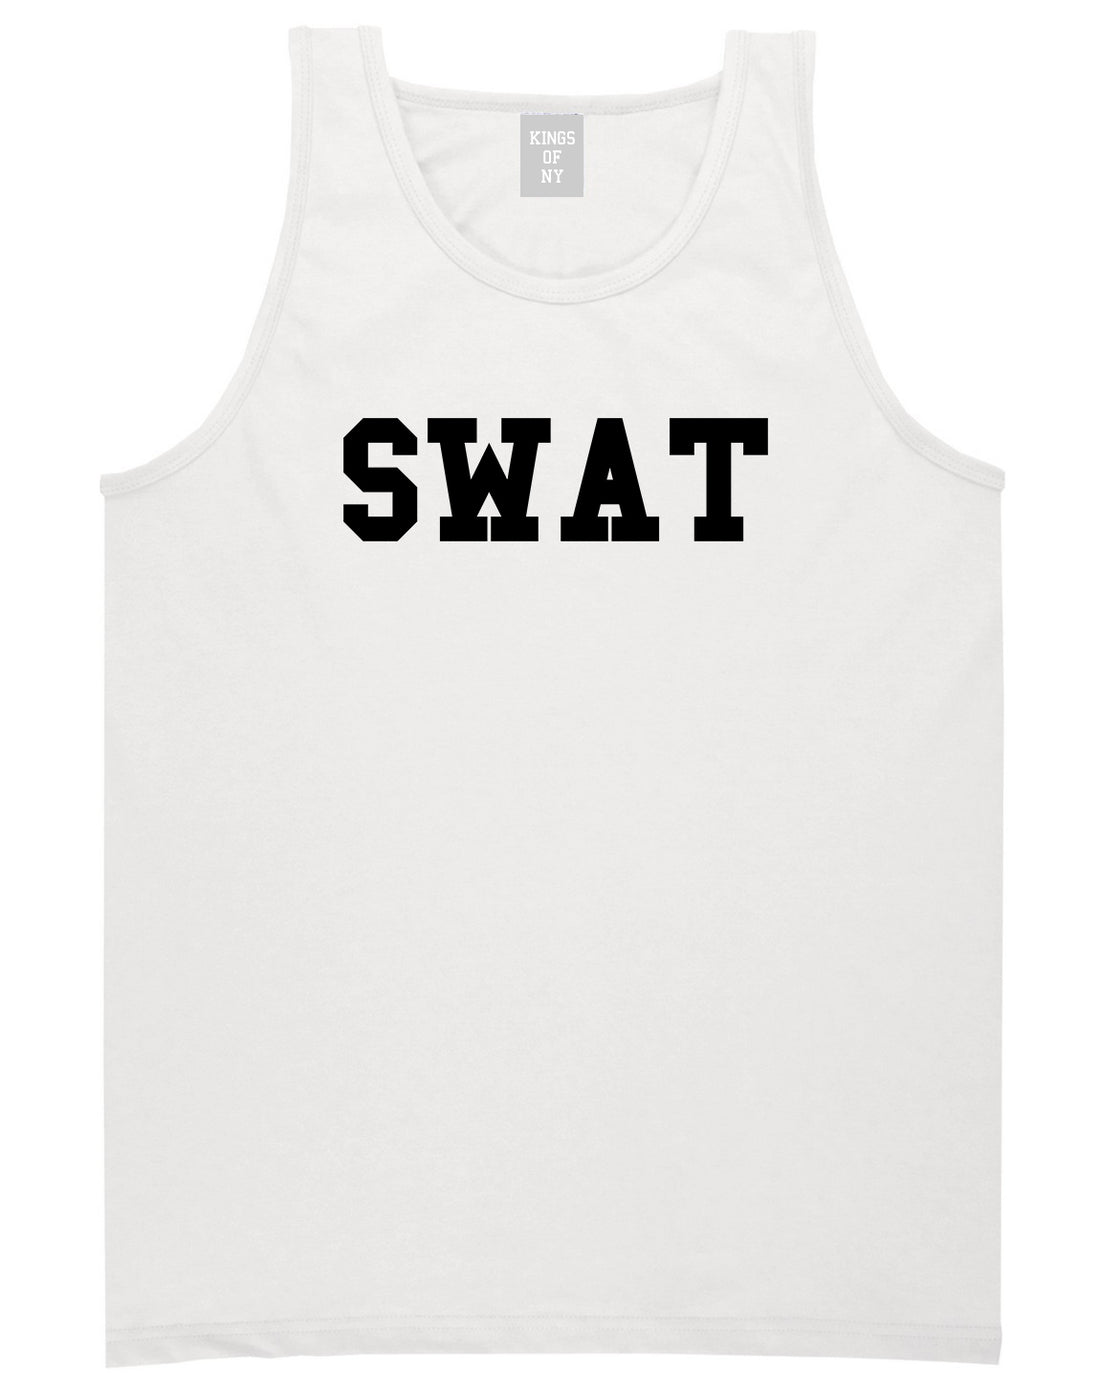 Swat Law Enforcement Mens White Tank Top Shirt by KINGS OF NY